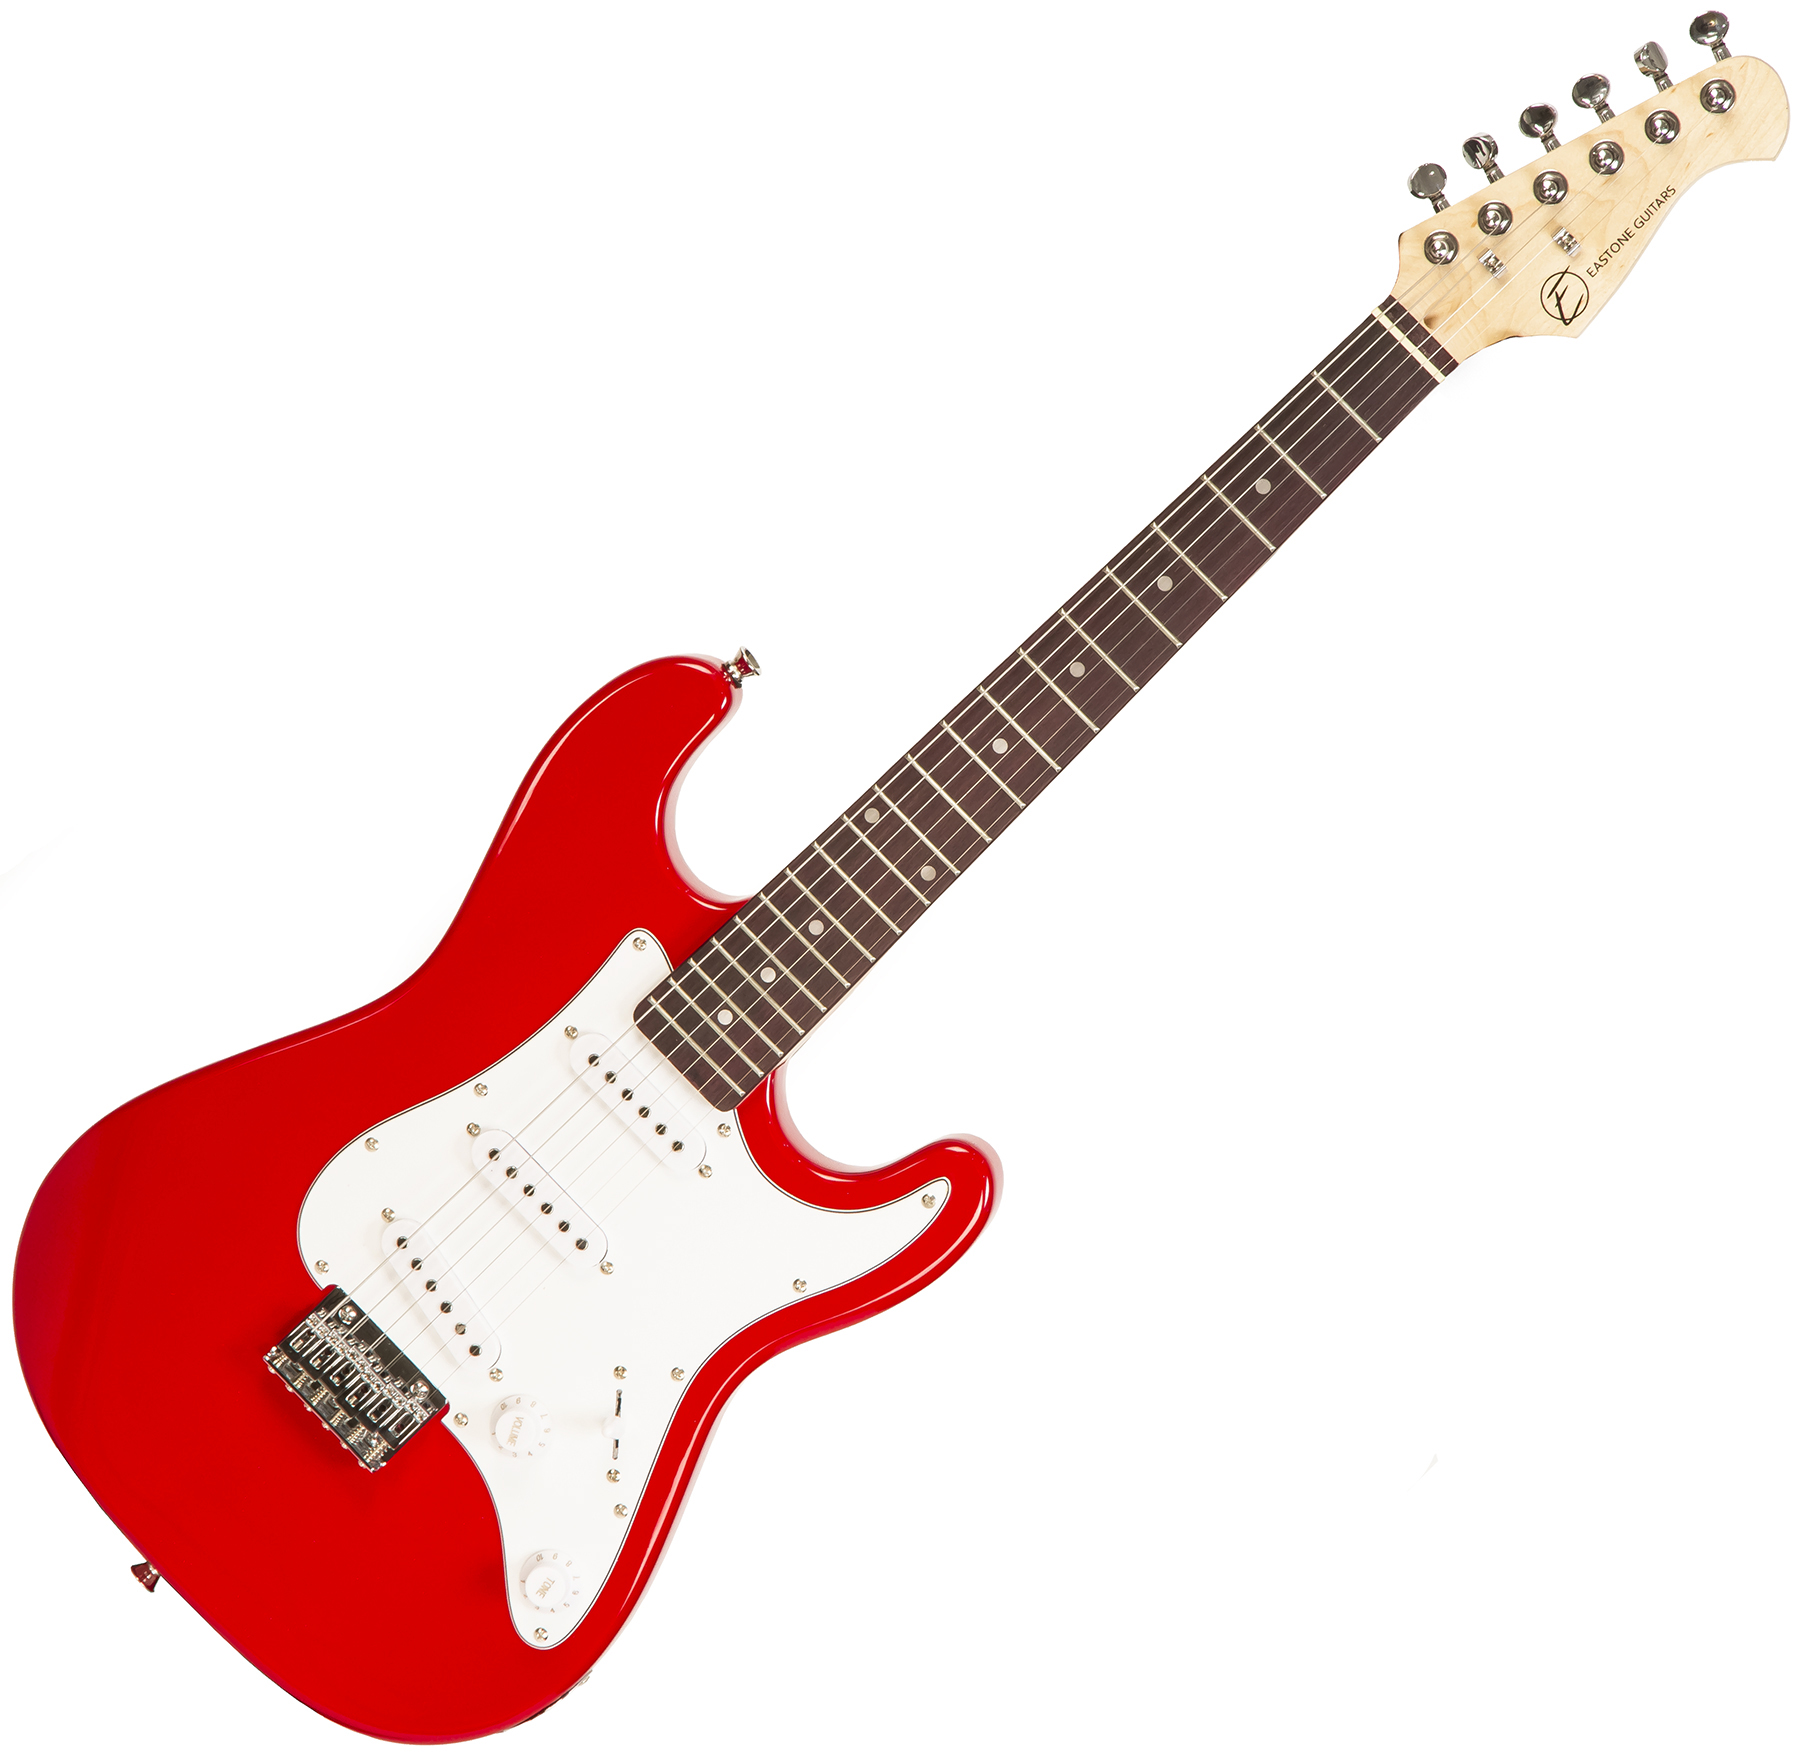 STR Mini +Marshall MG10G +Accessories - red Electric guitar set Eastone